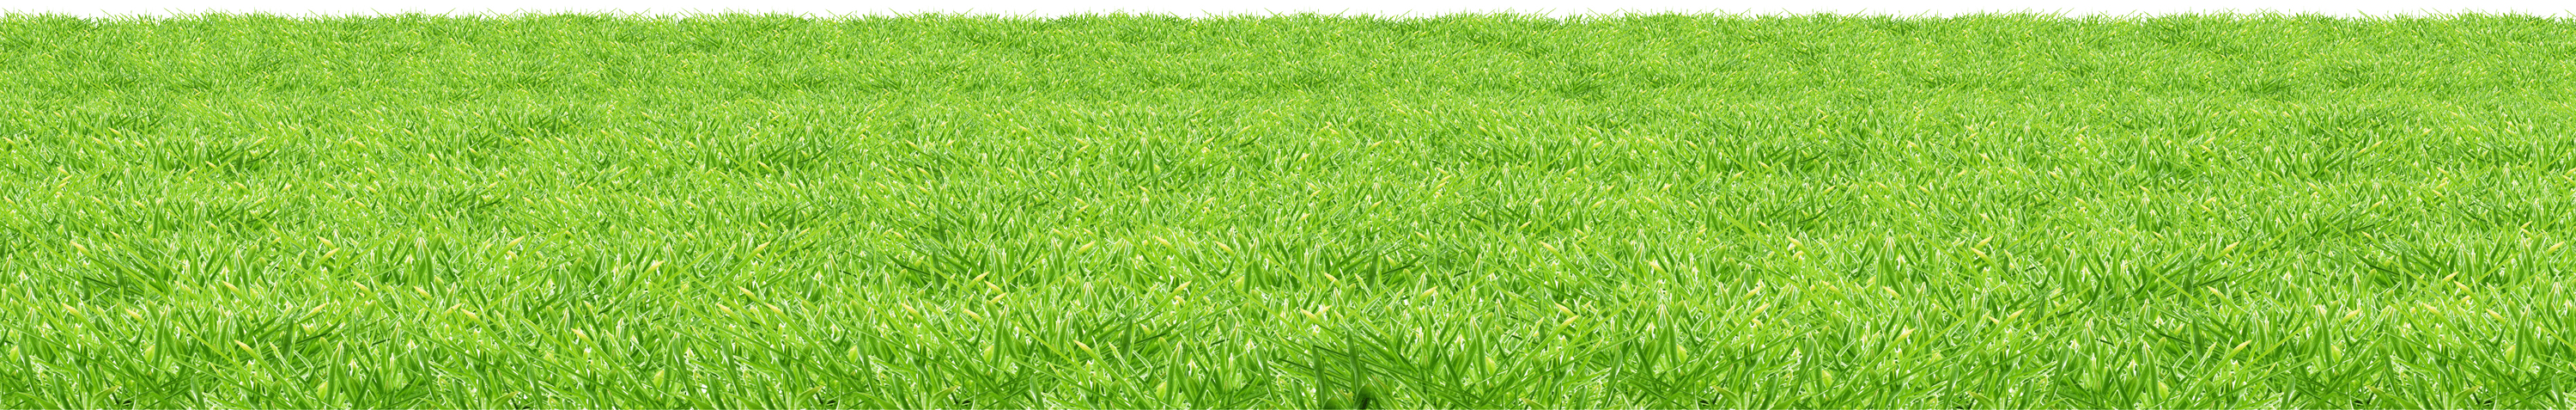 Field Grass Sunny Free Transparent Image HQ PNG Image